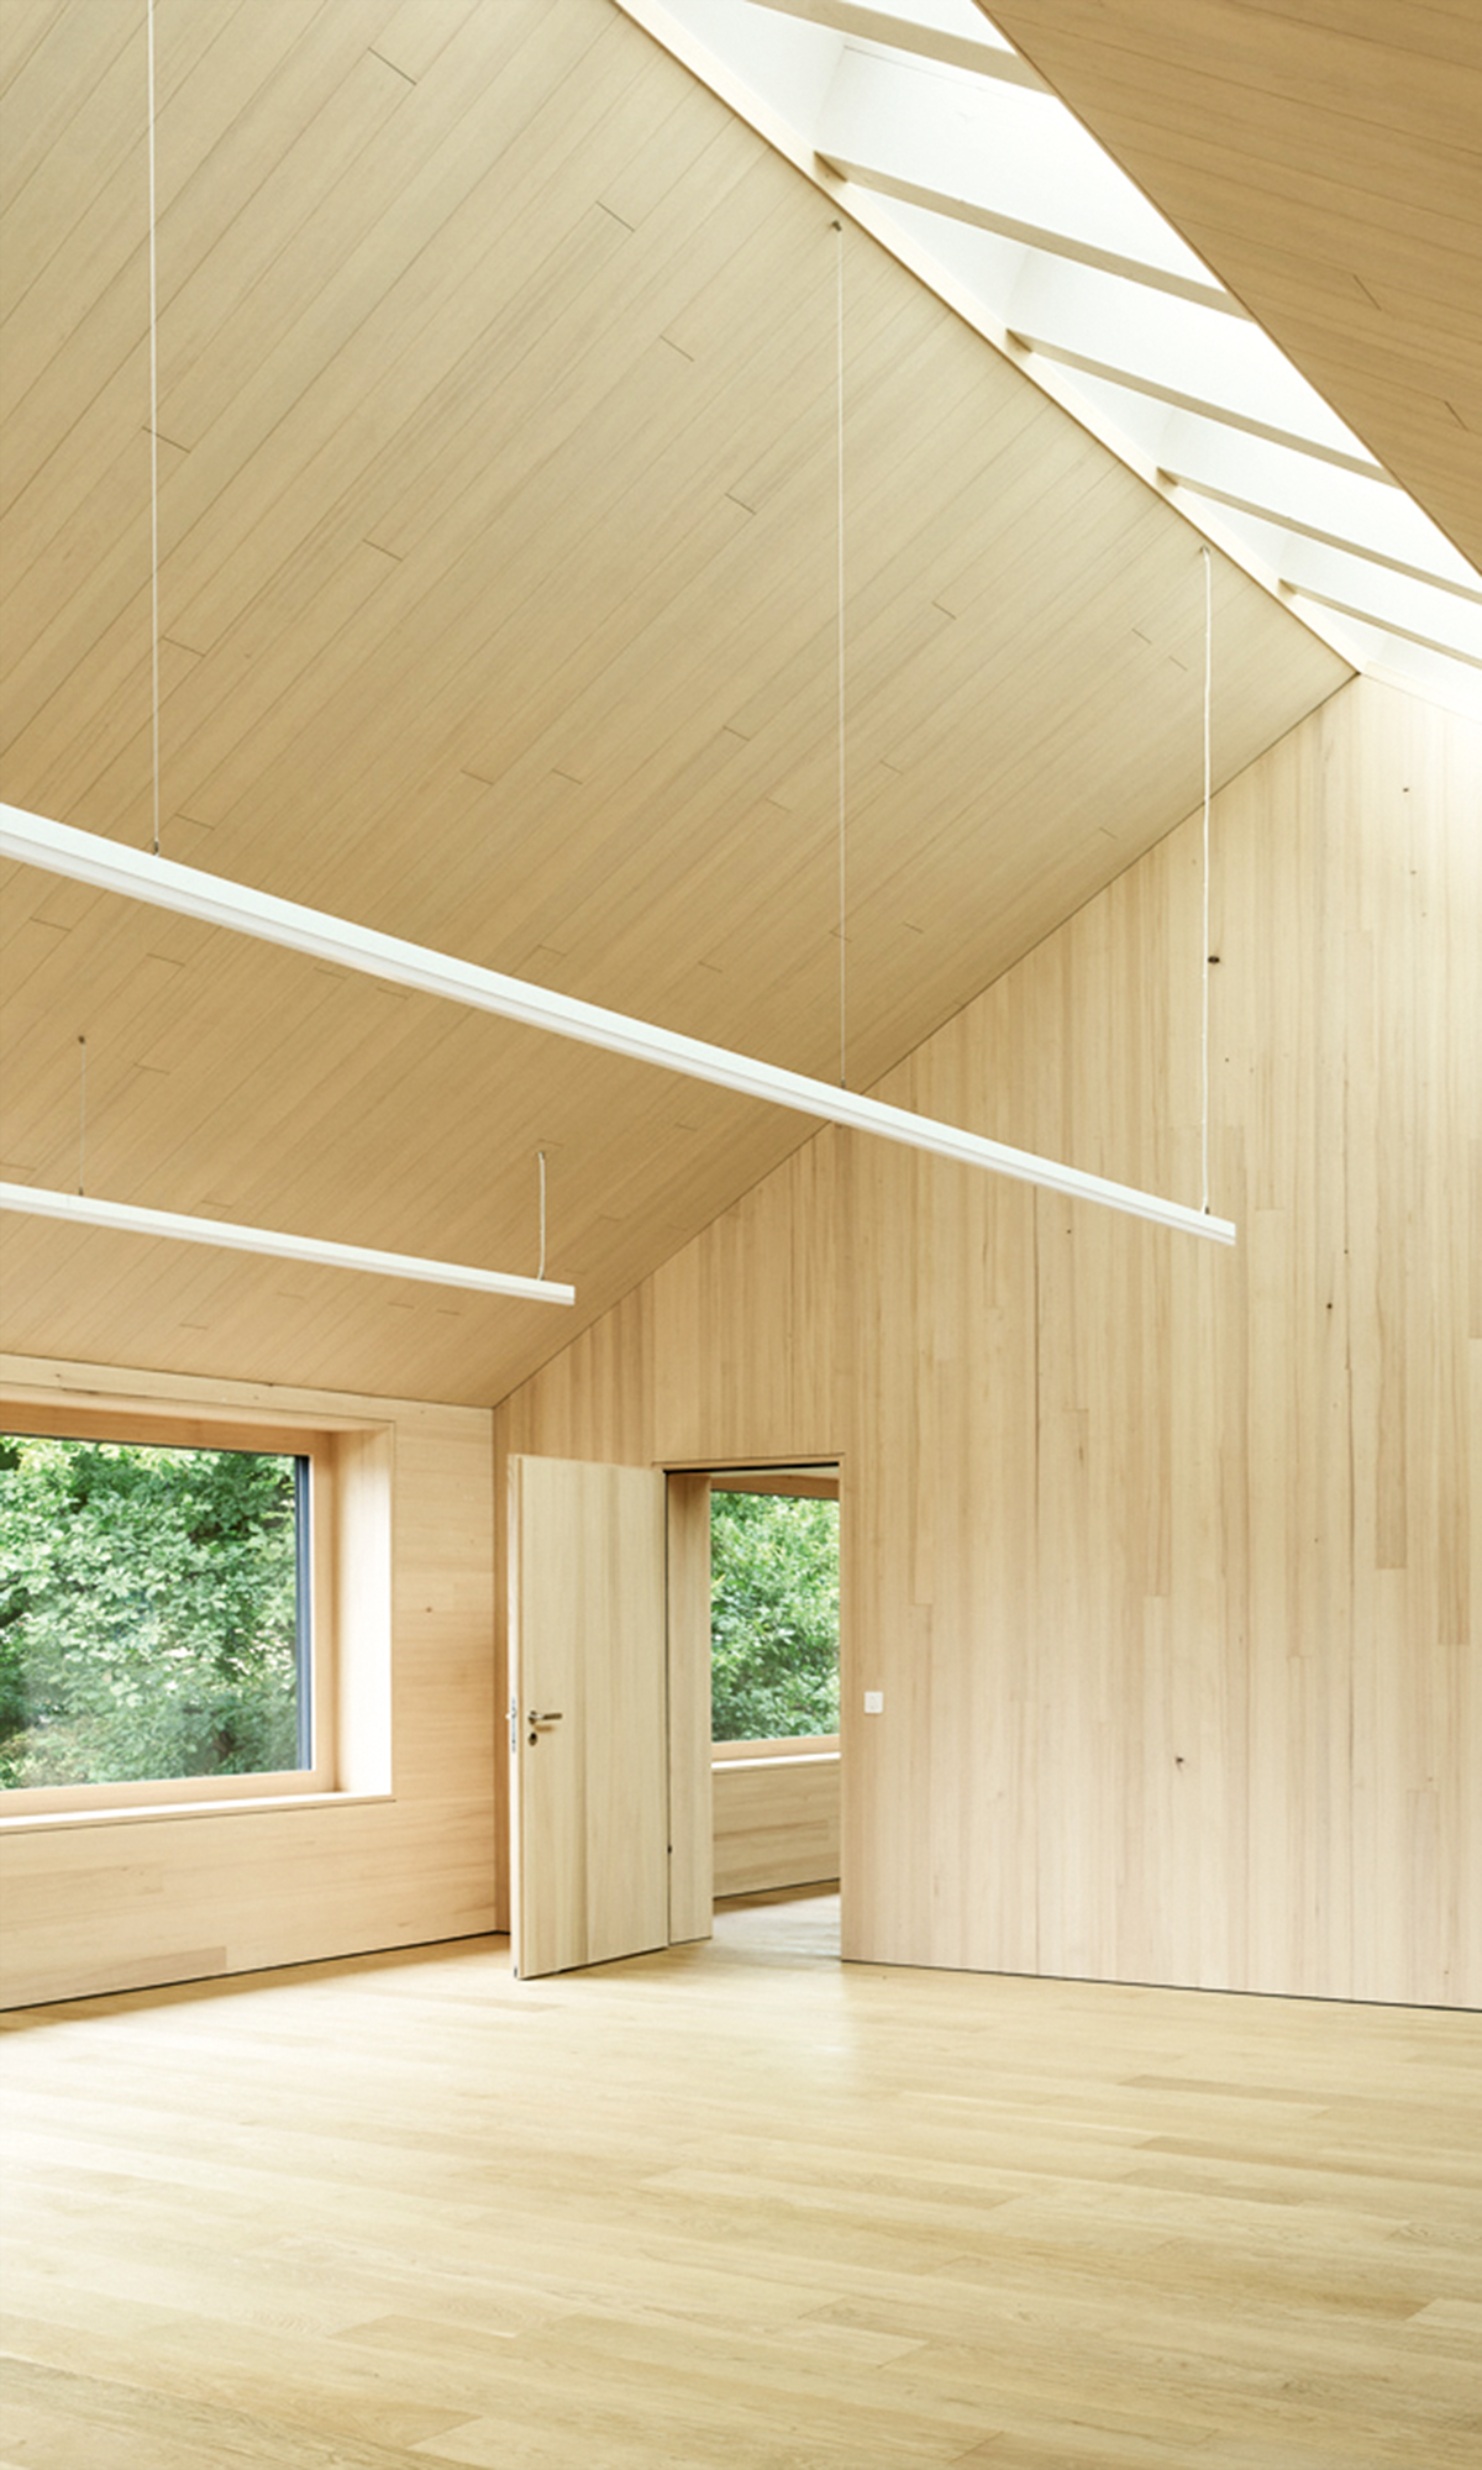 High ceilings with interior finishing in timber and natural light coming from above